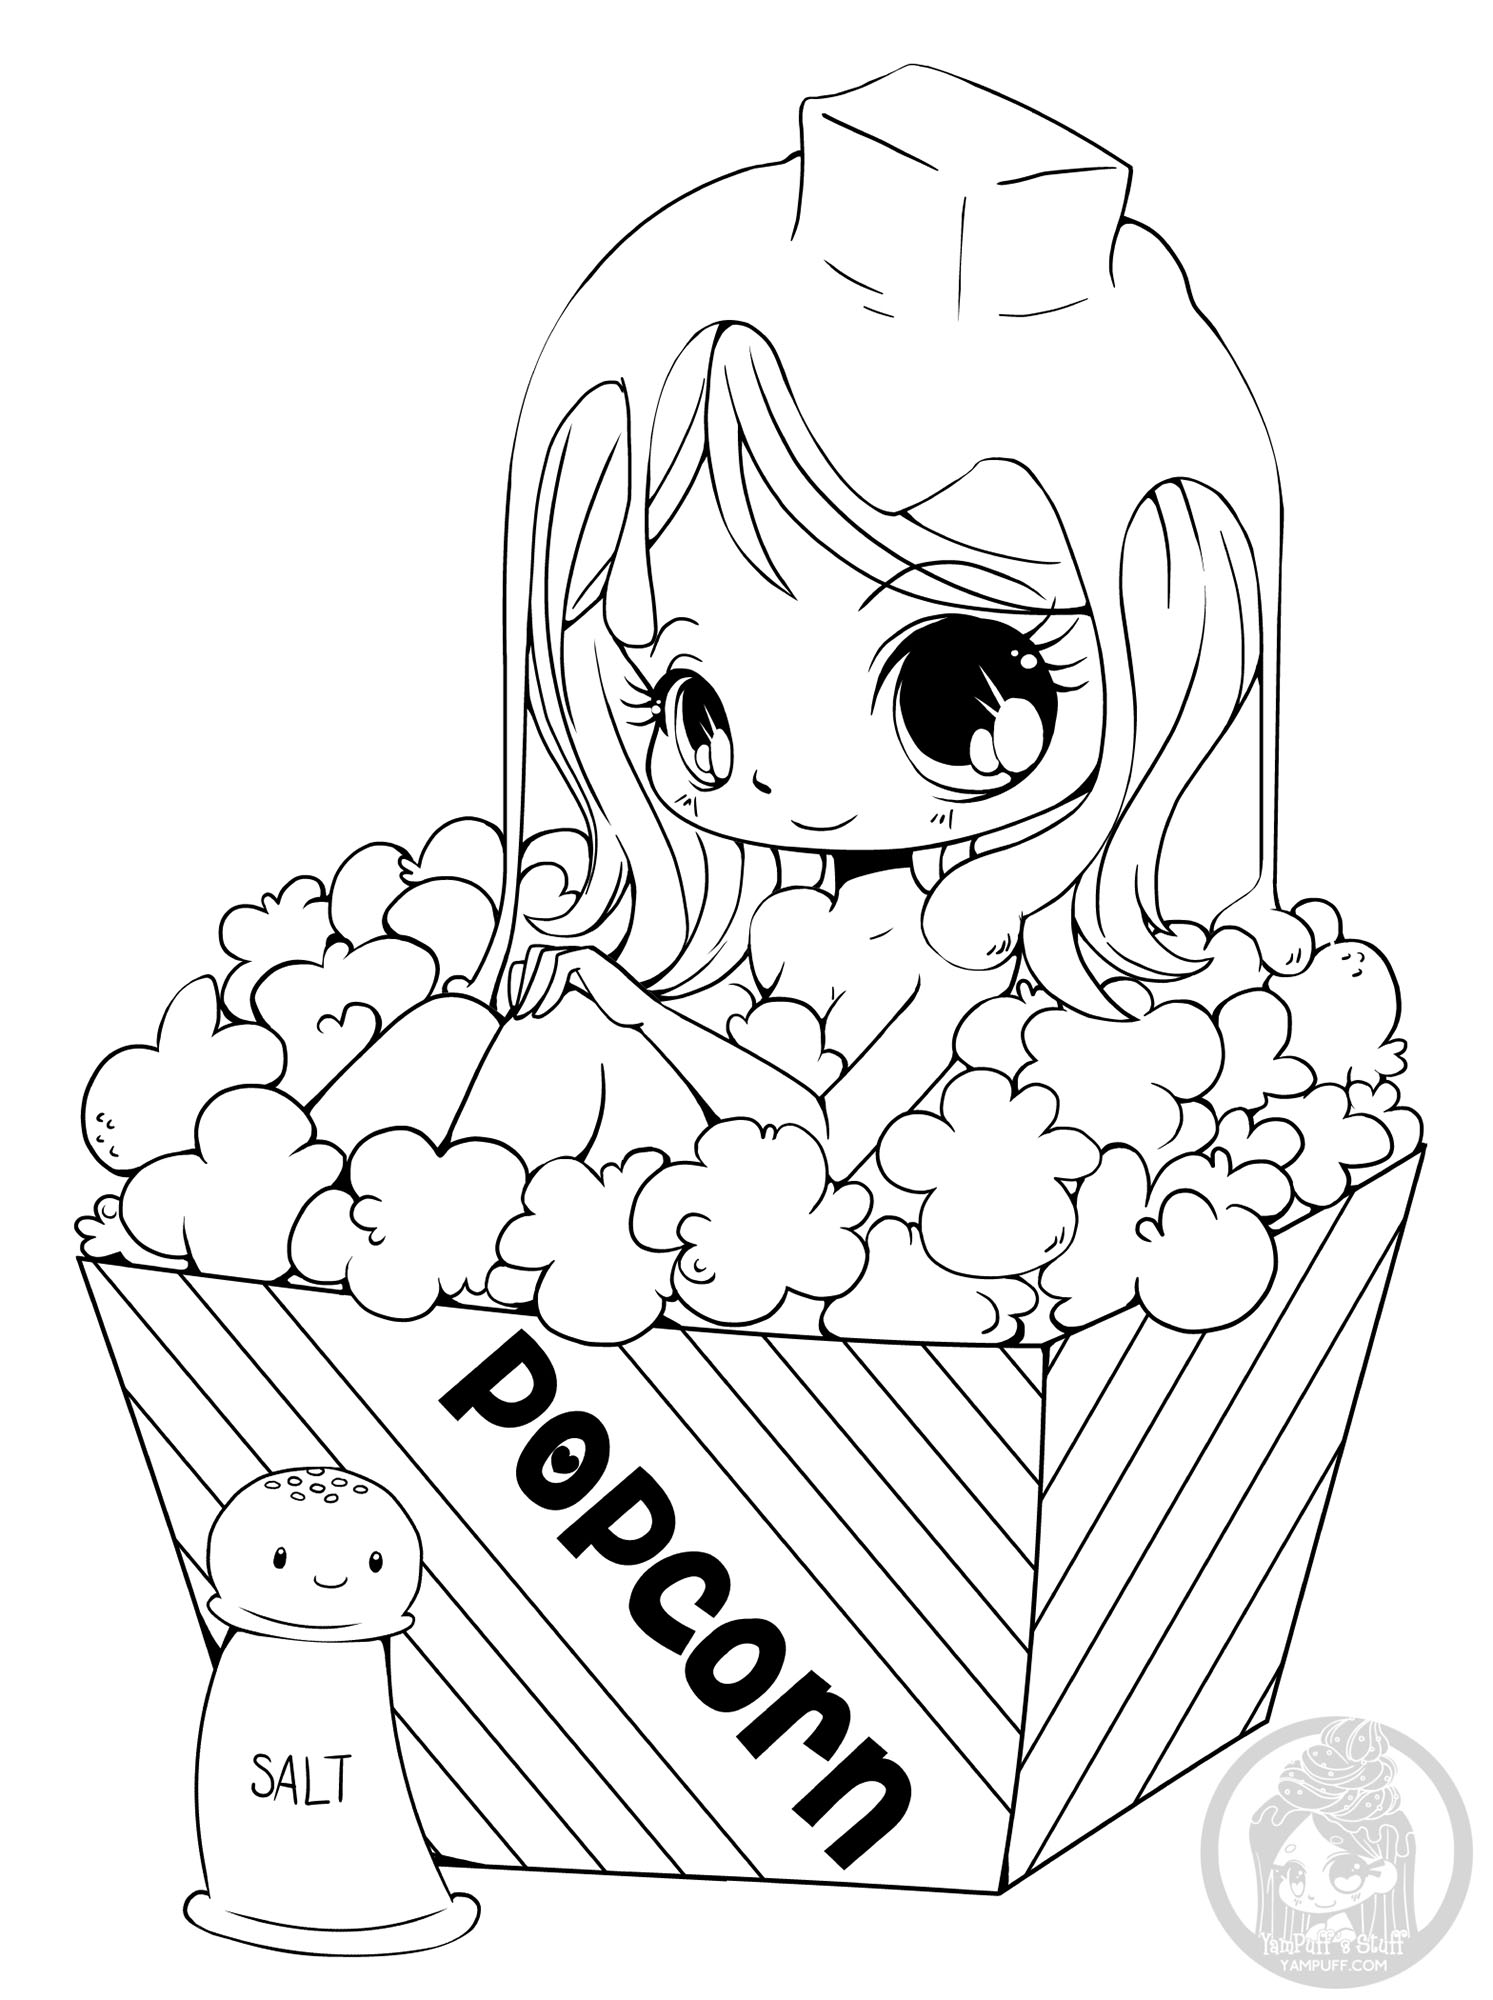 Popcorn girl - Return to childhood Adult Coloring Pages